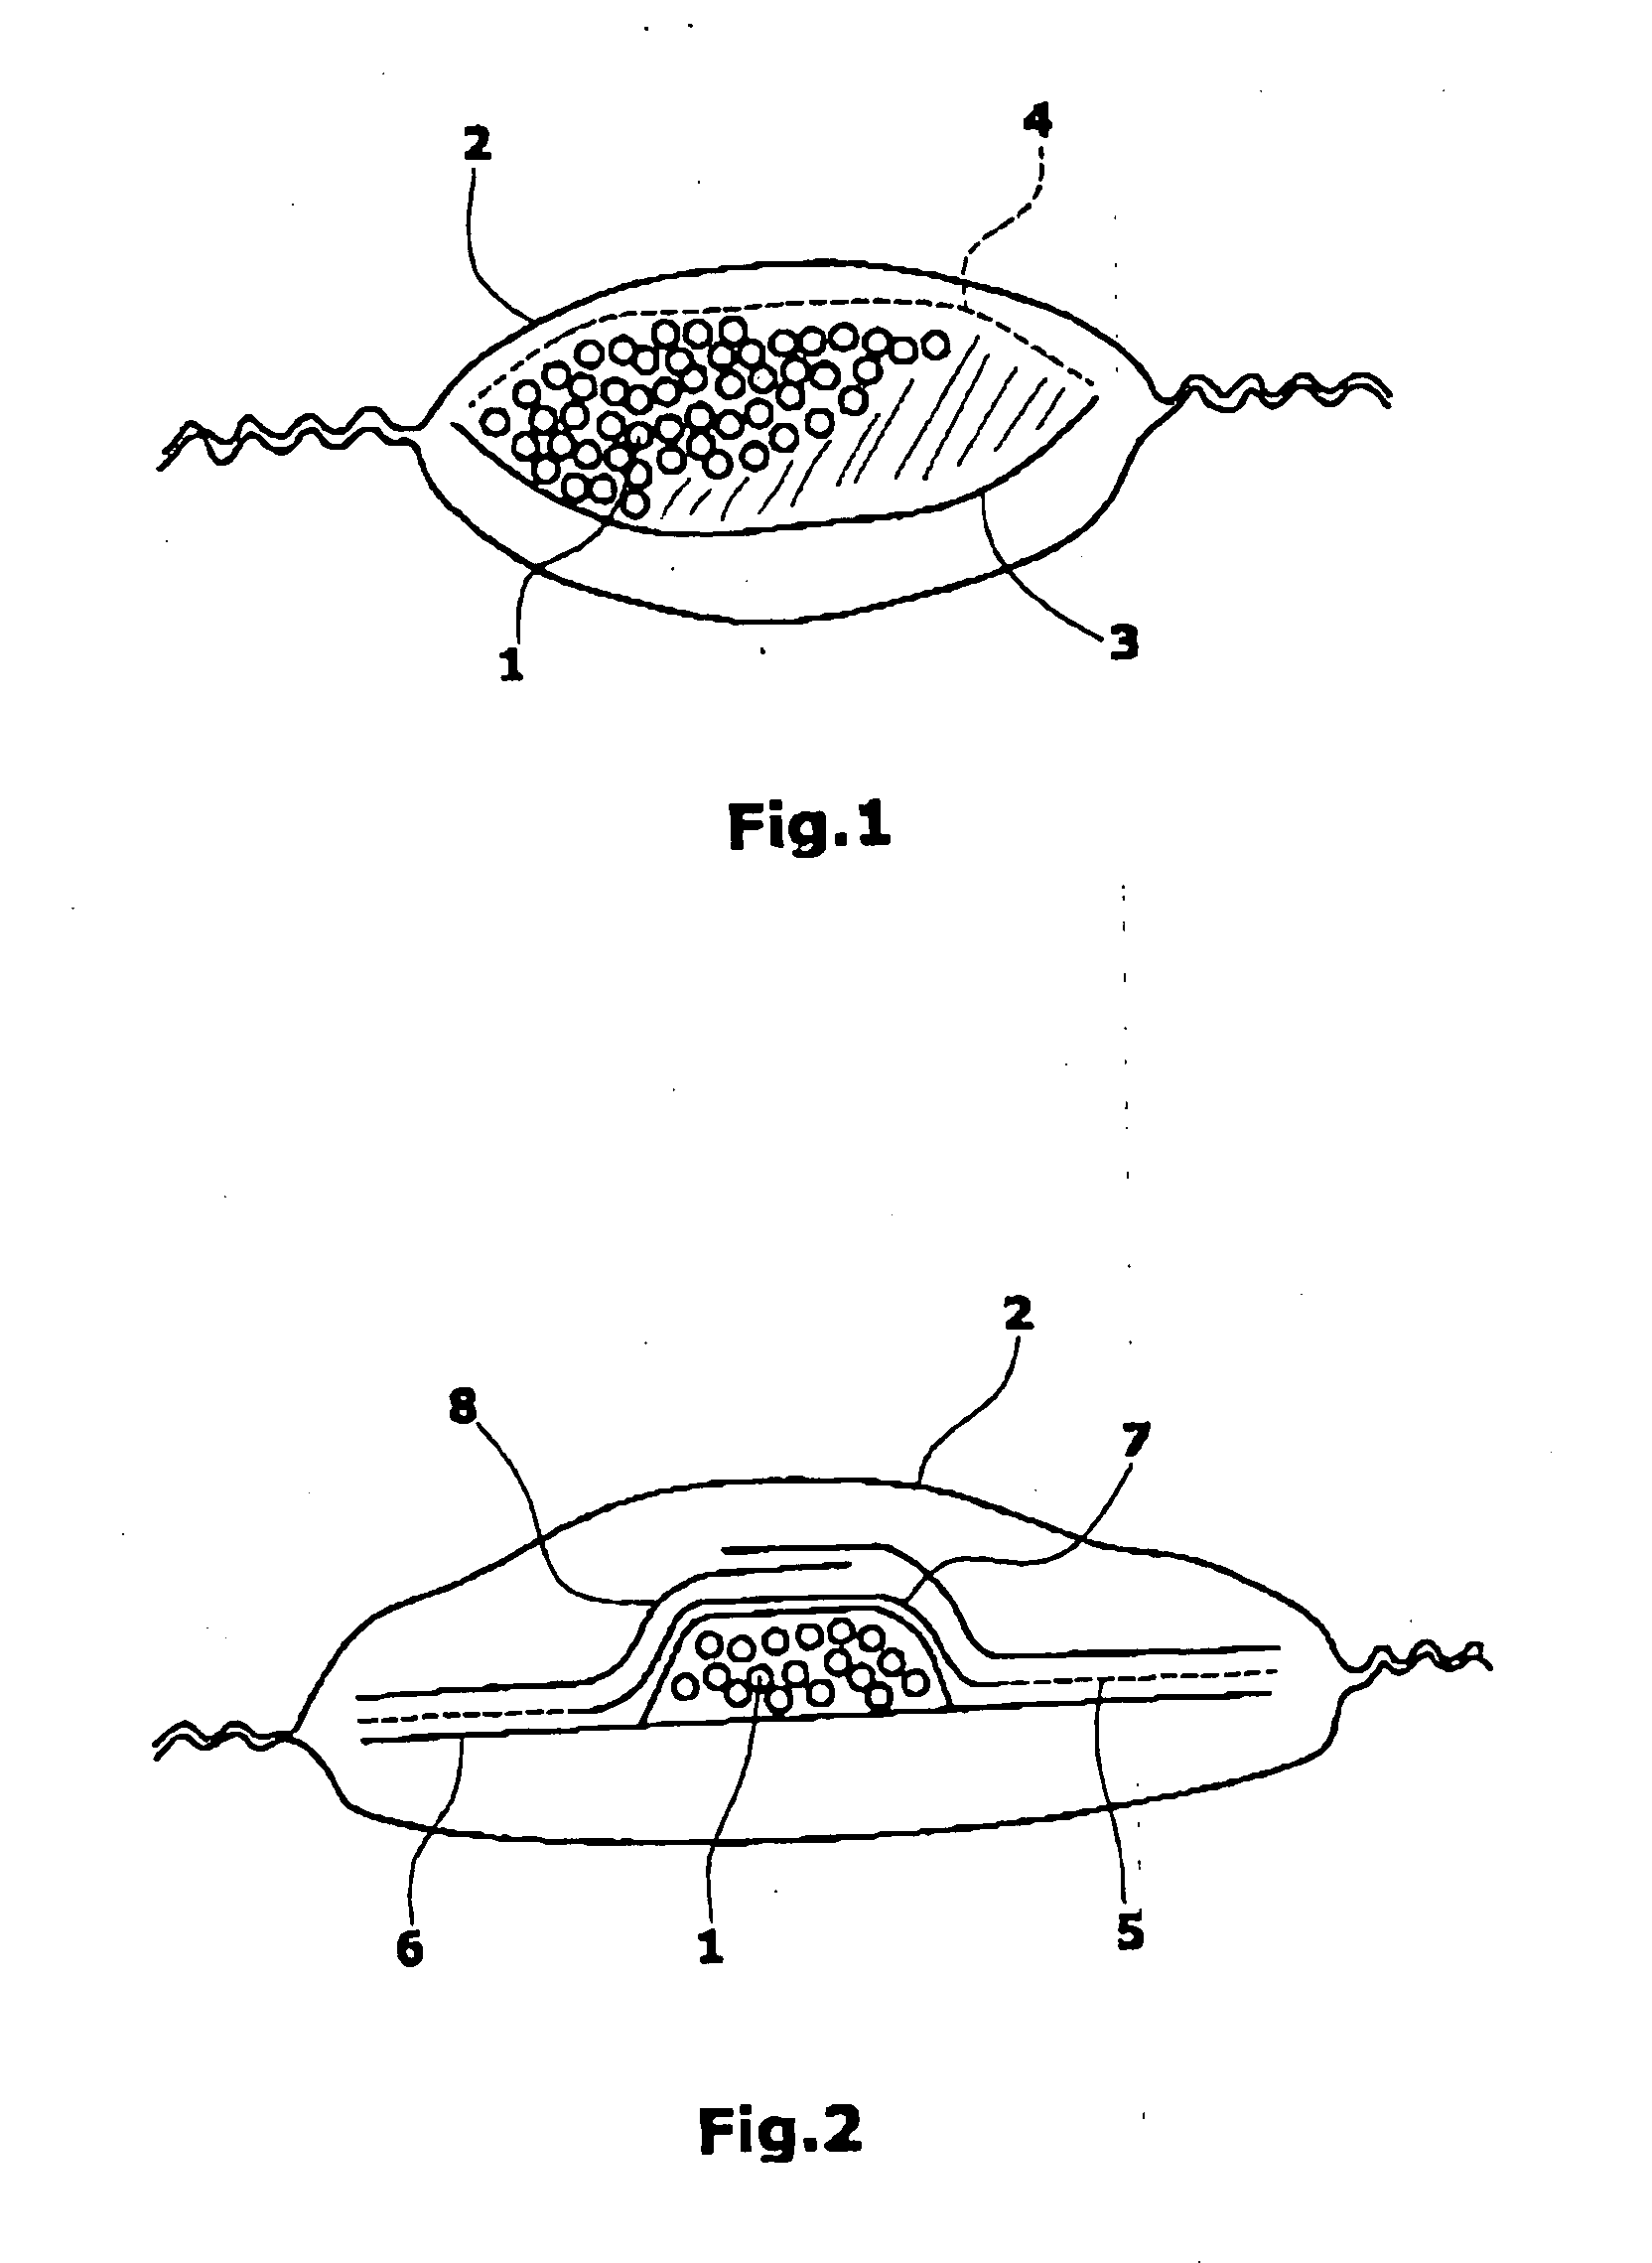 Wound treating agent